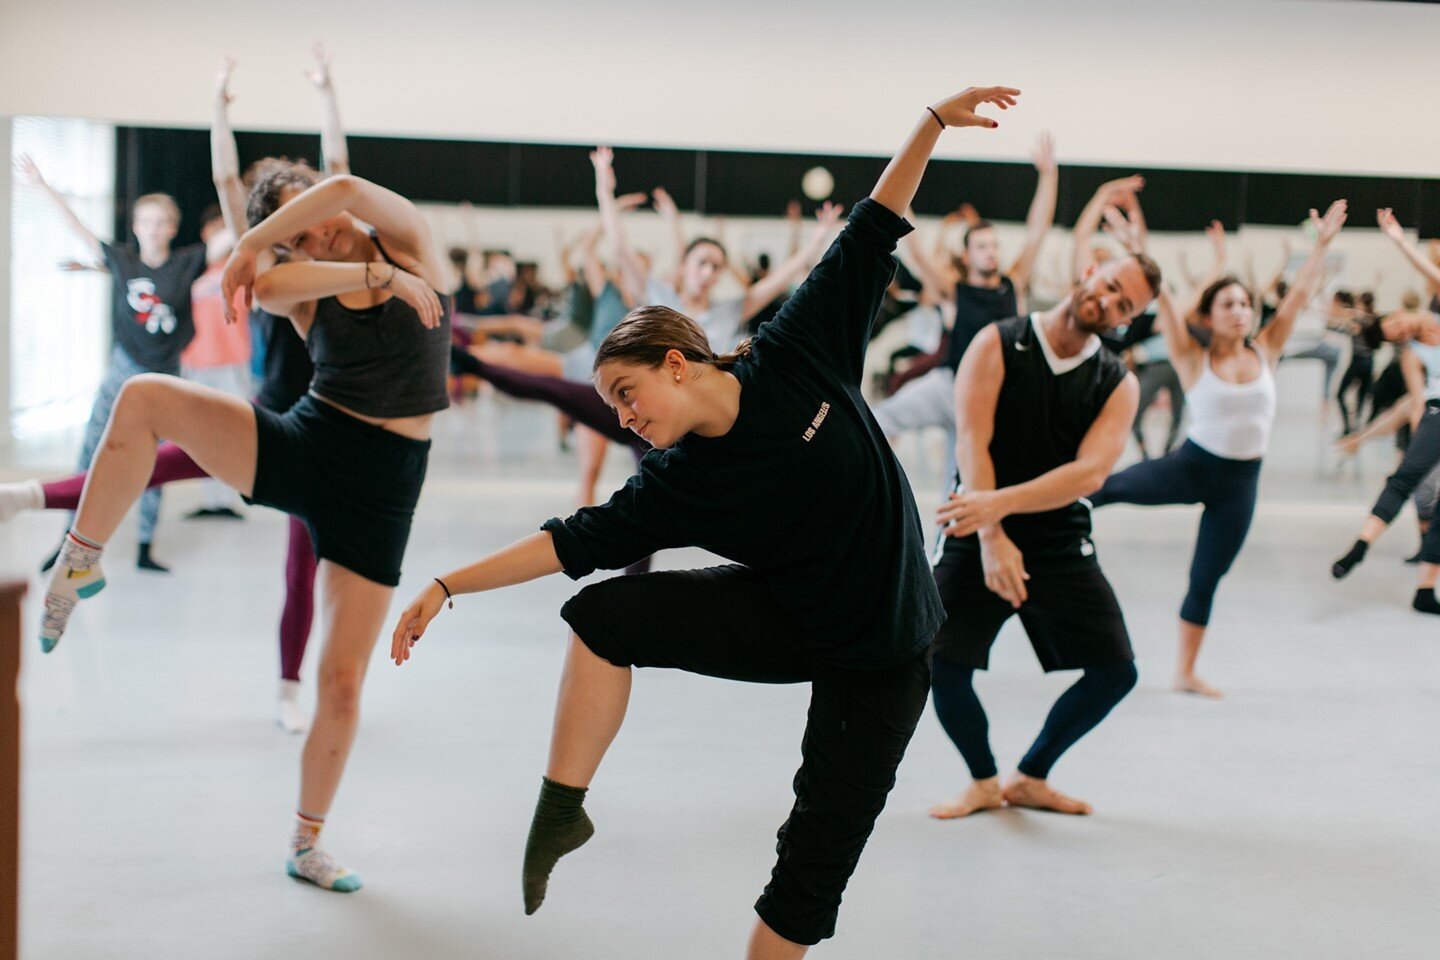 Still looking for #summerdance plans? Join us in person or via Zoom at Backhausdance Hybrid Summer Dance 2021.
.
.
.
[BACKHAUSDANCE HYBRID SUMMER DANCE at CHAPMAN UNIVERSITY] Programs available for dancers ages 13 to professional.
.
.
.
#BDSI2021 #ba